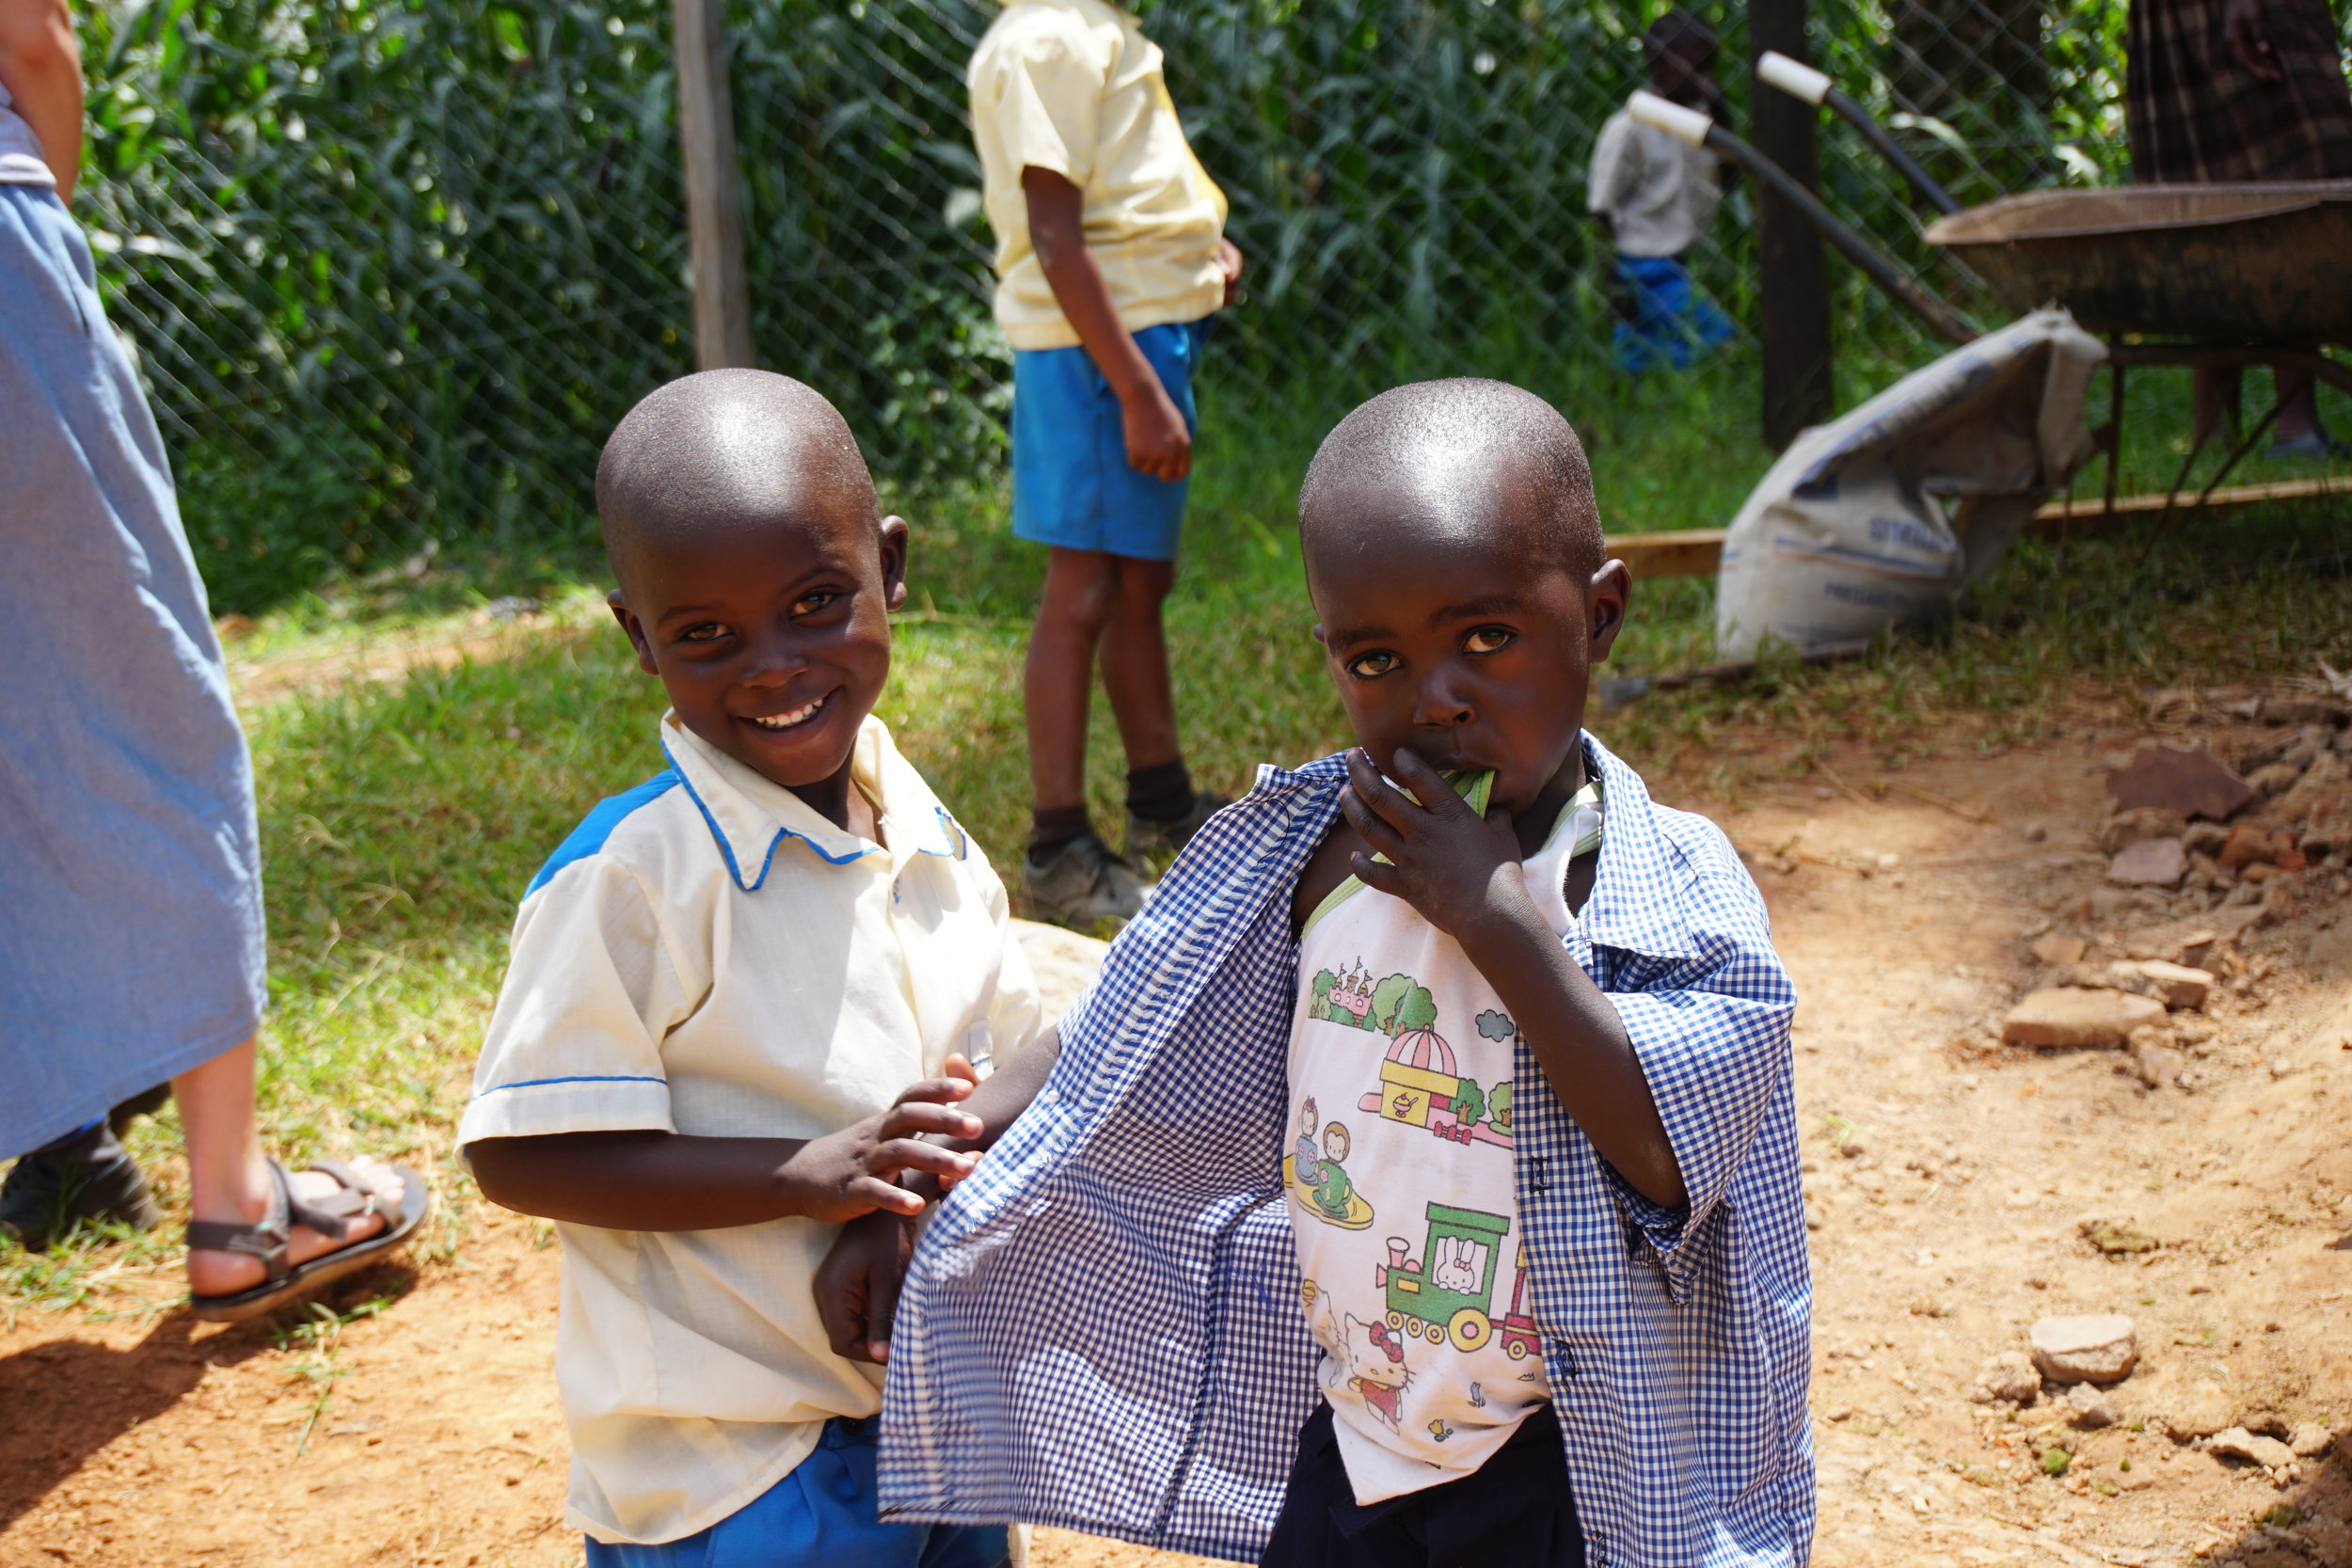  These two boys were from HIP's youngest grade. The students were still getting used to wearing the school uniforms. 